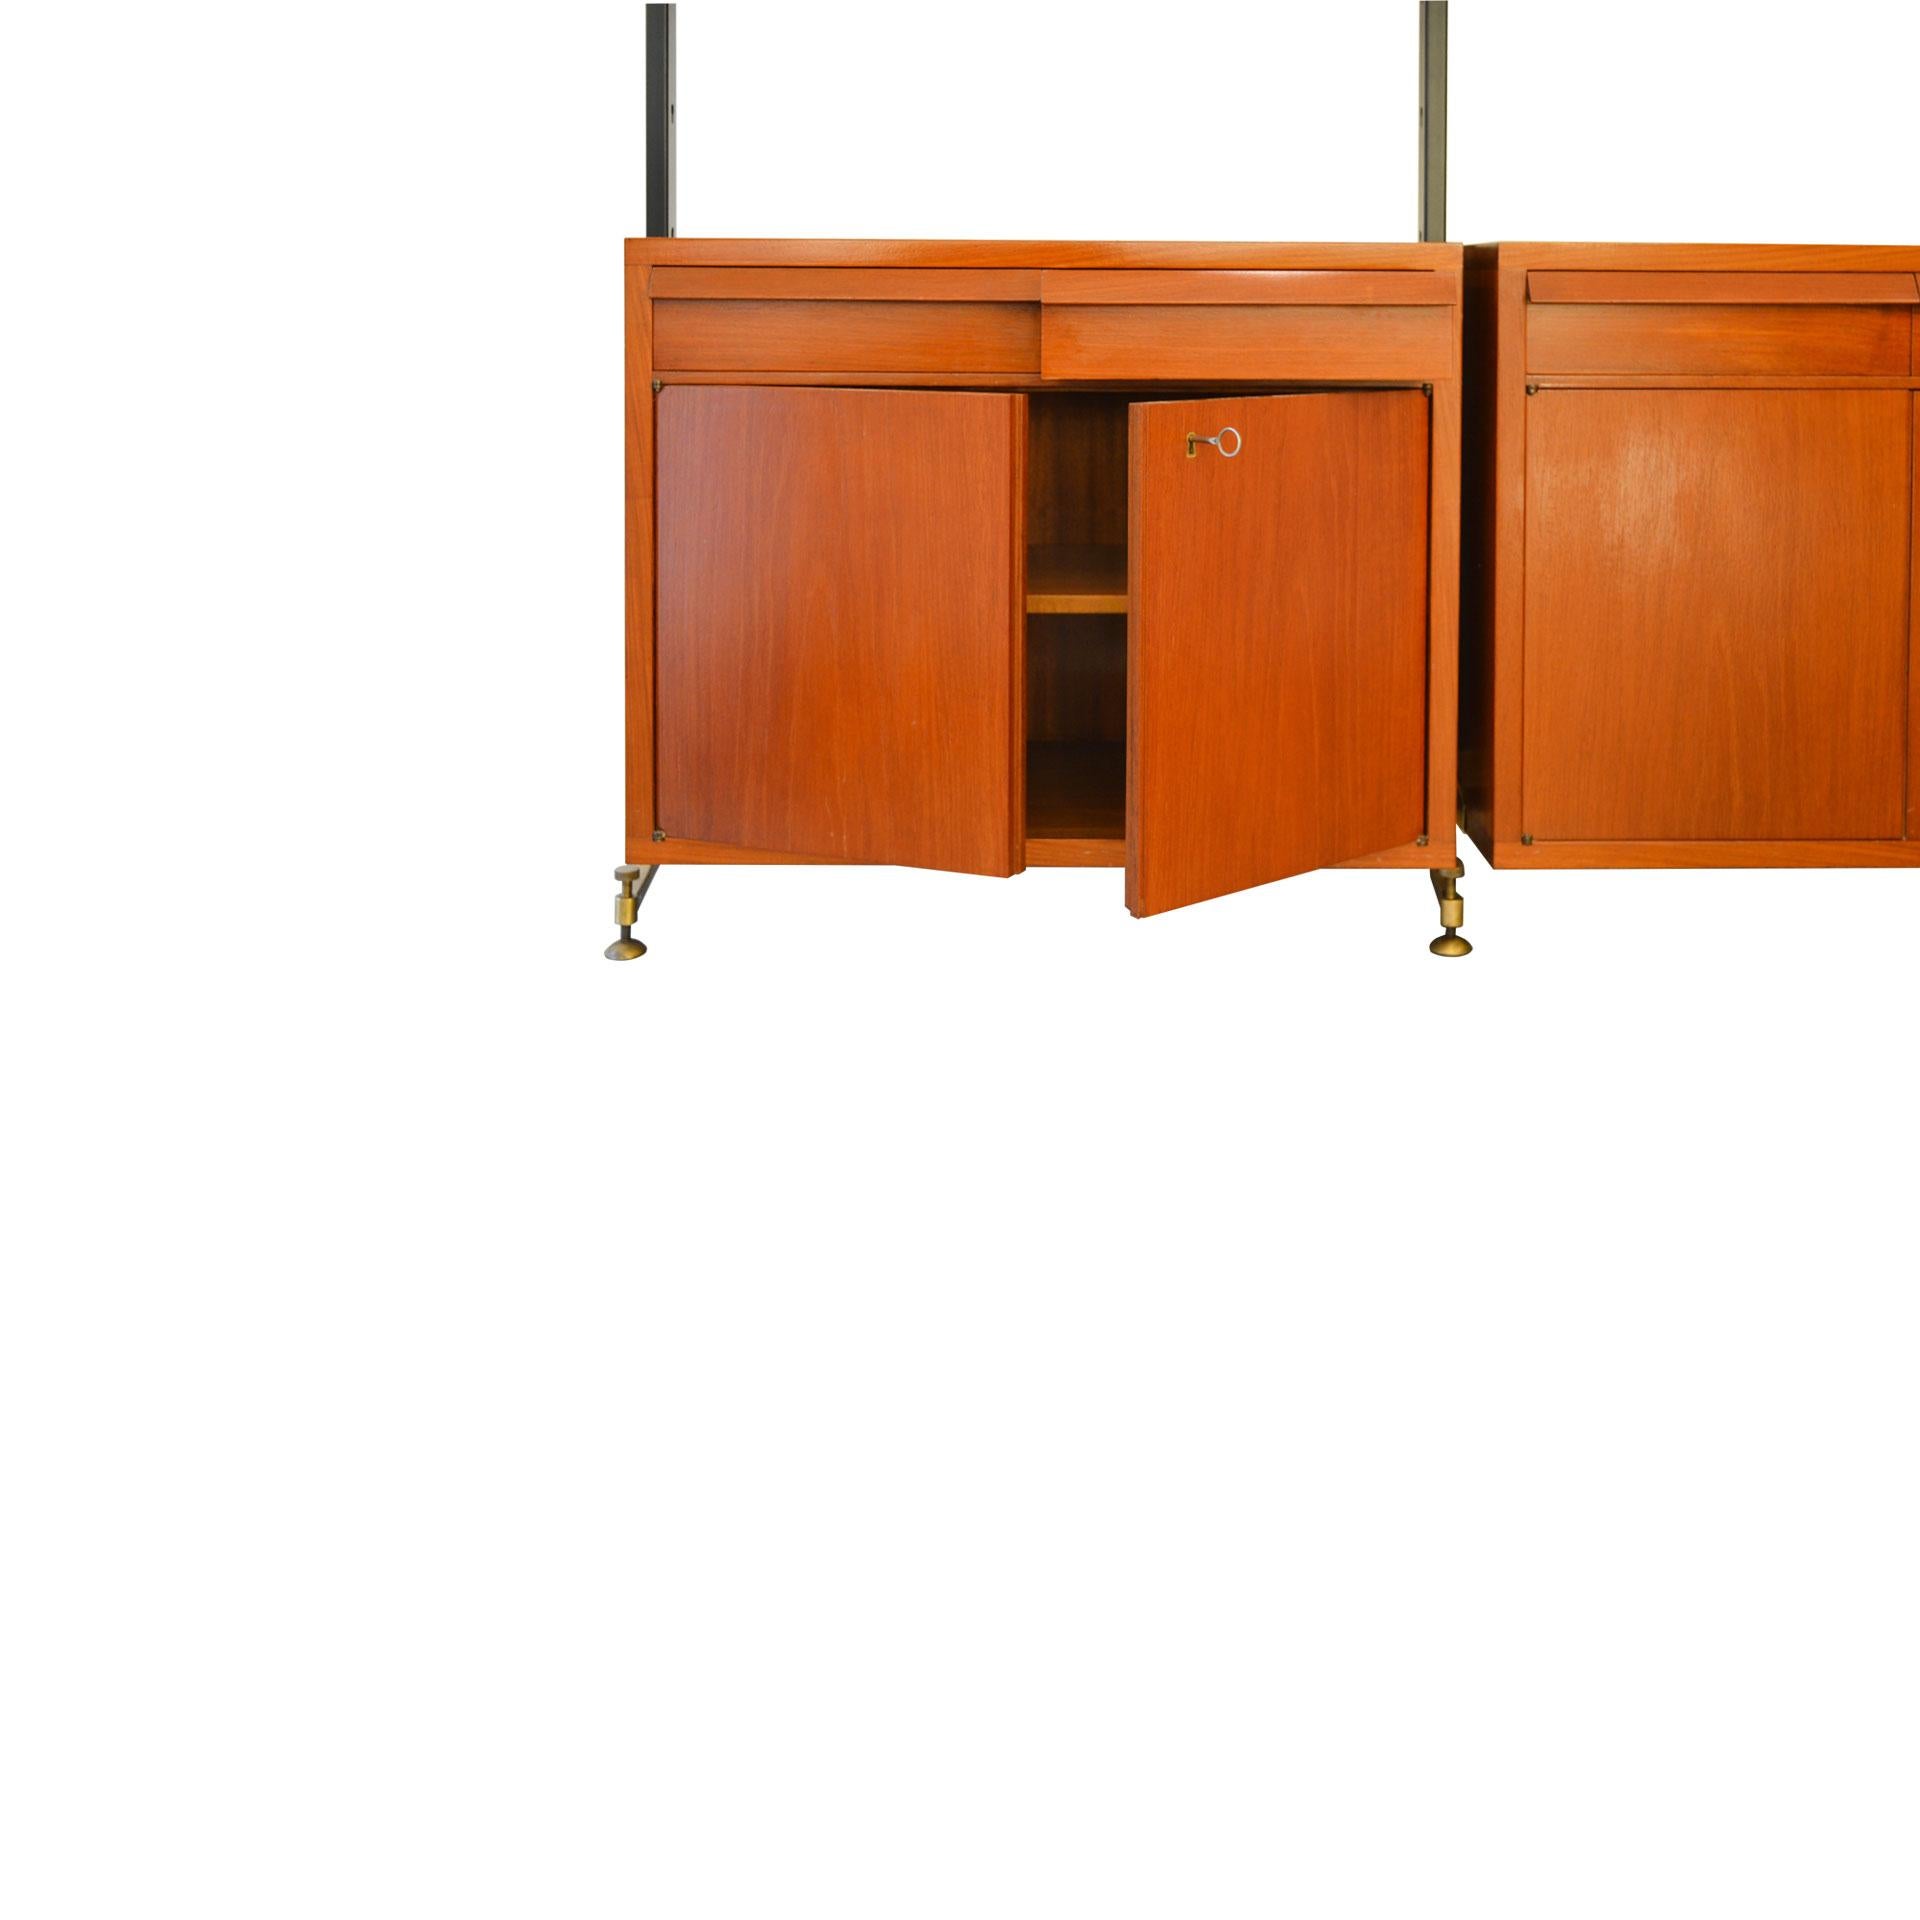 Lacquered 20th Century Bookcase with Shelves and Cabinets in Wood and Brass Italian School